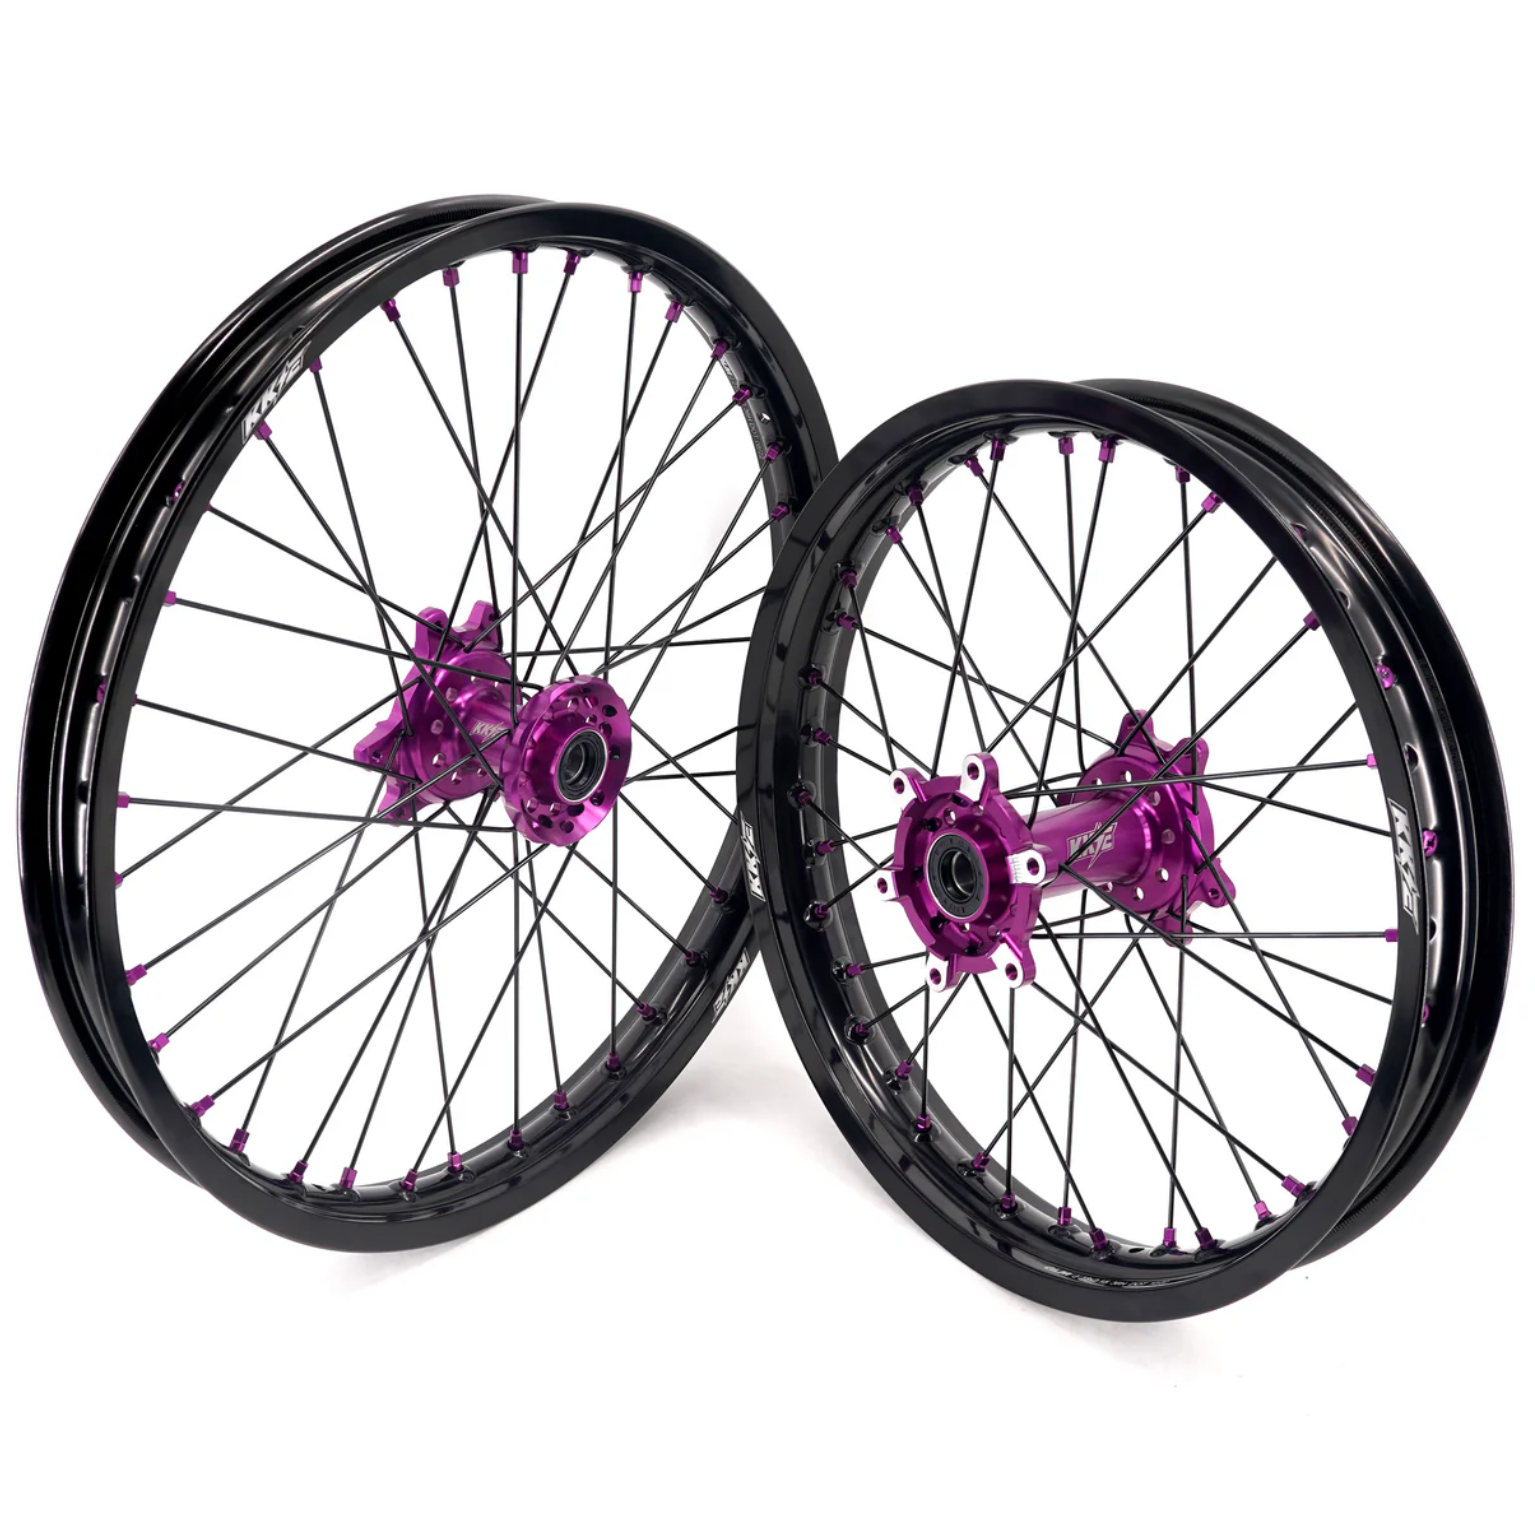 18/21" KKE Complete Wheel and Tire combo for Ultra Bee